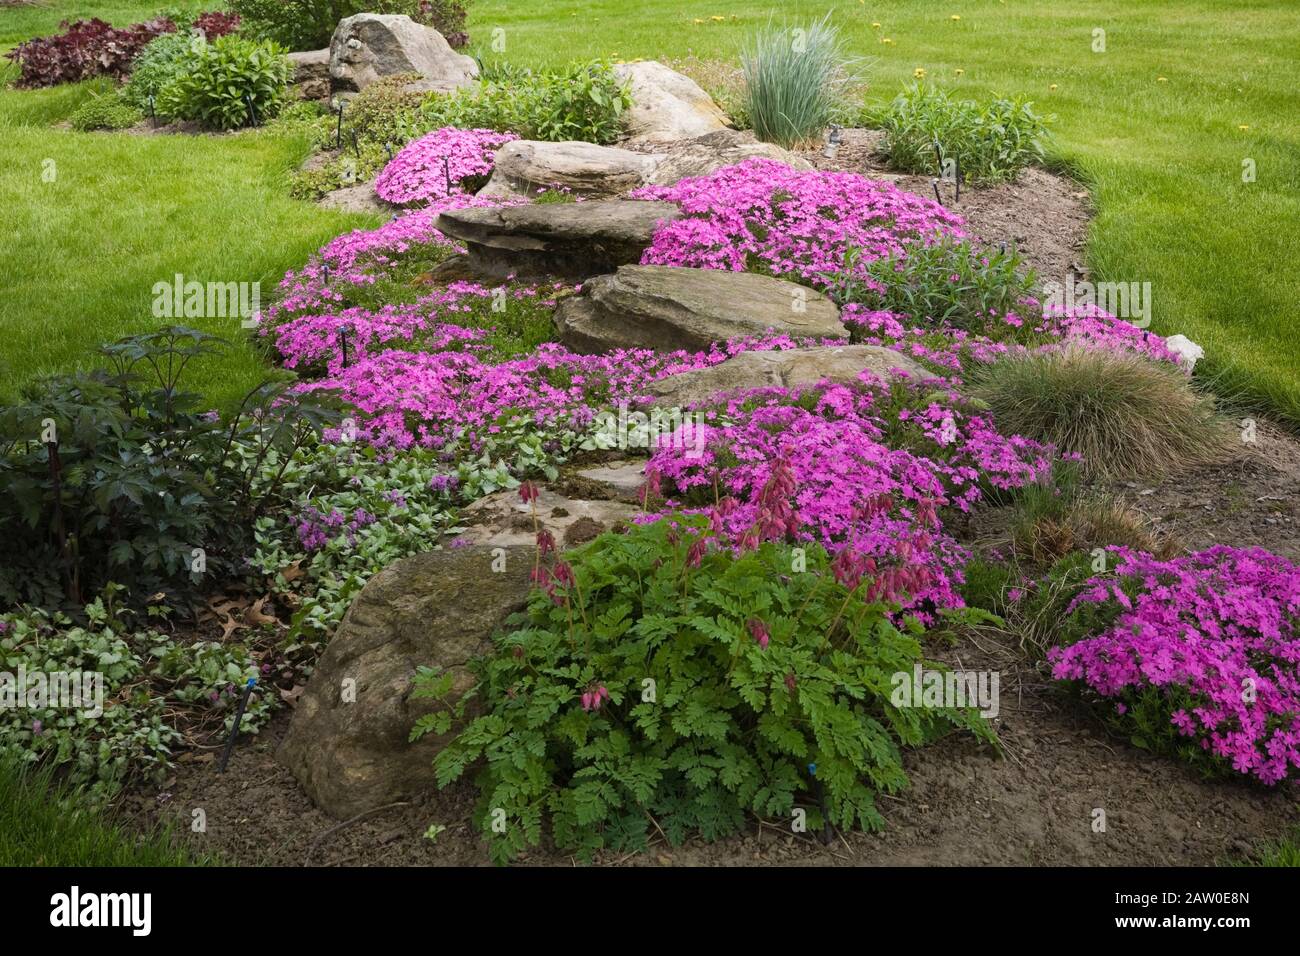 Border with Dicentra - Bleeding Heart flowers in foreground and pink Phlox subulata in backyard garden in spring Stock Photo